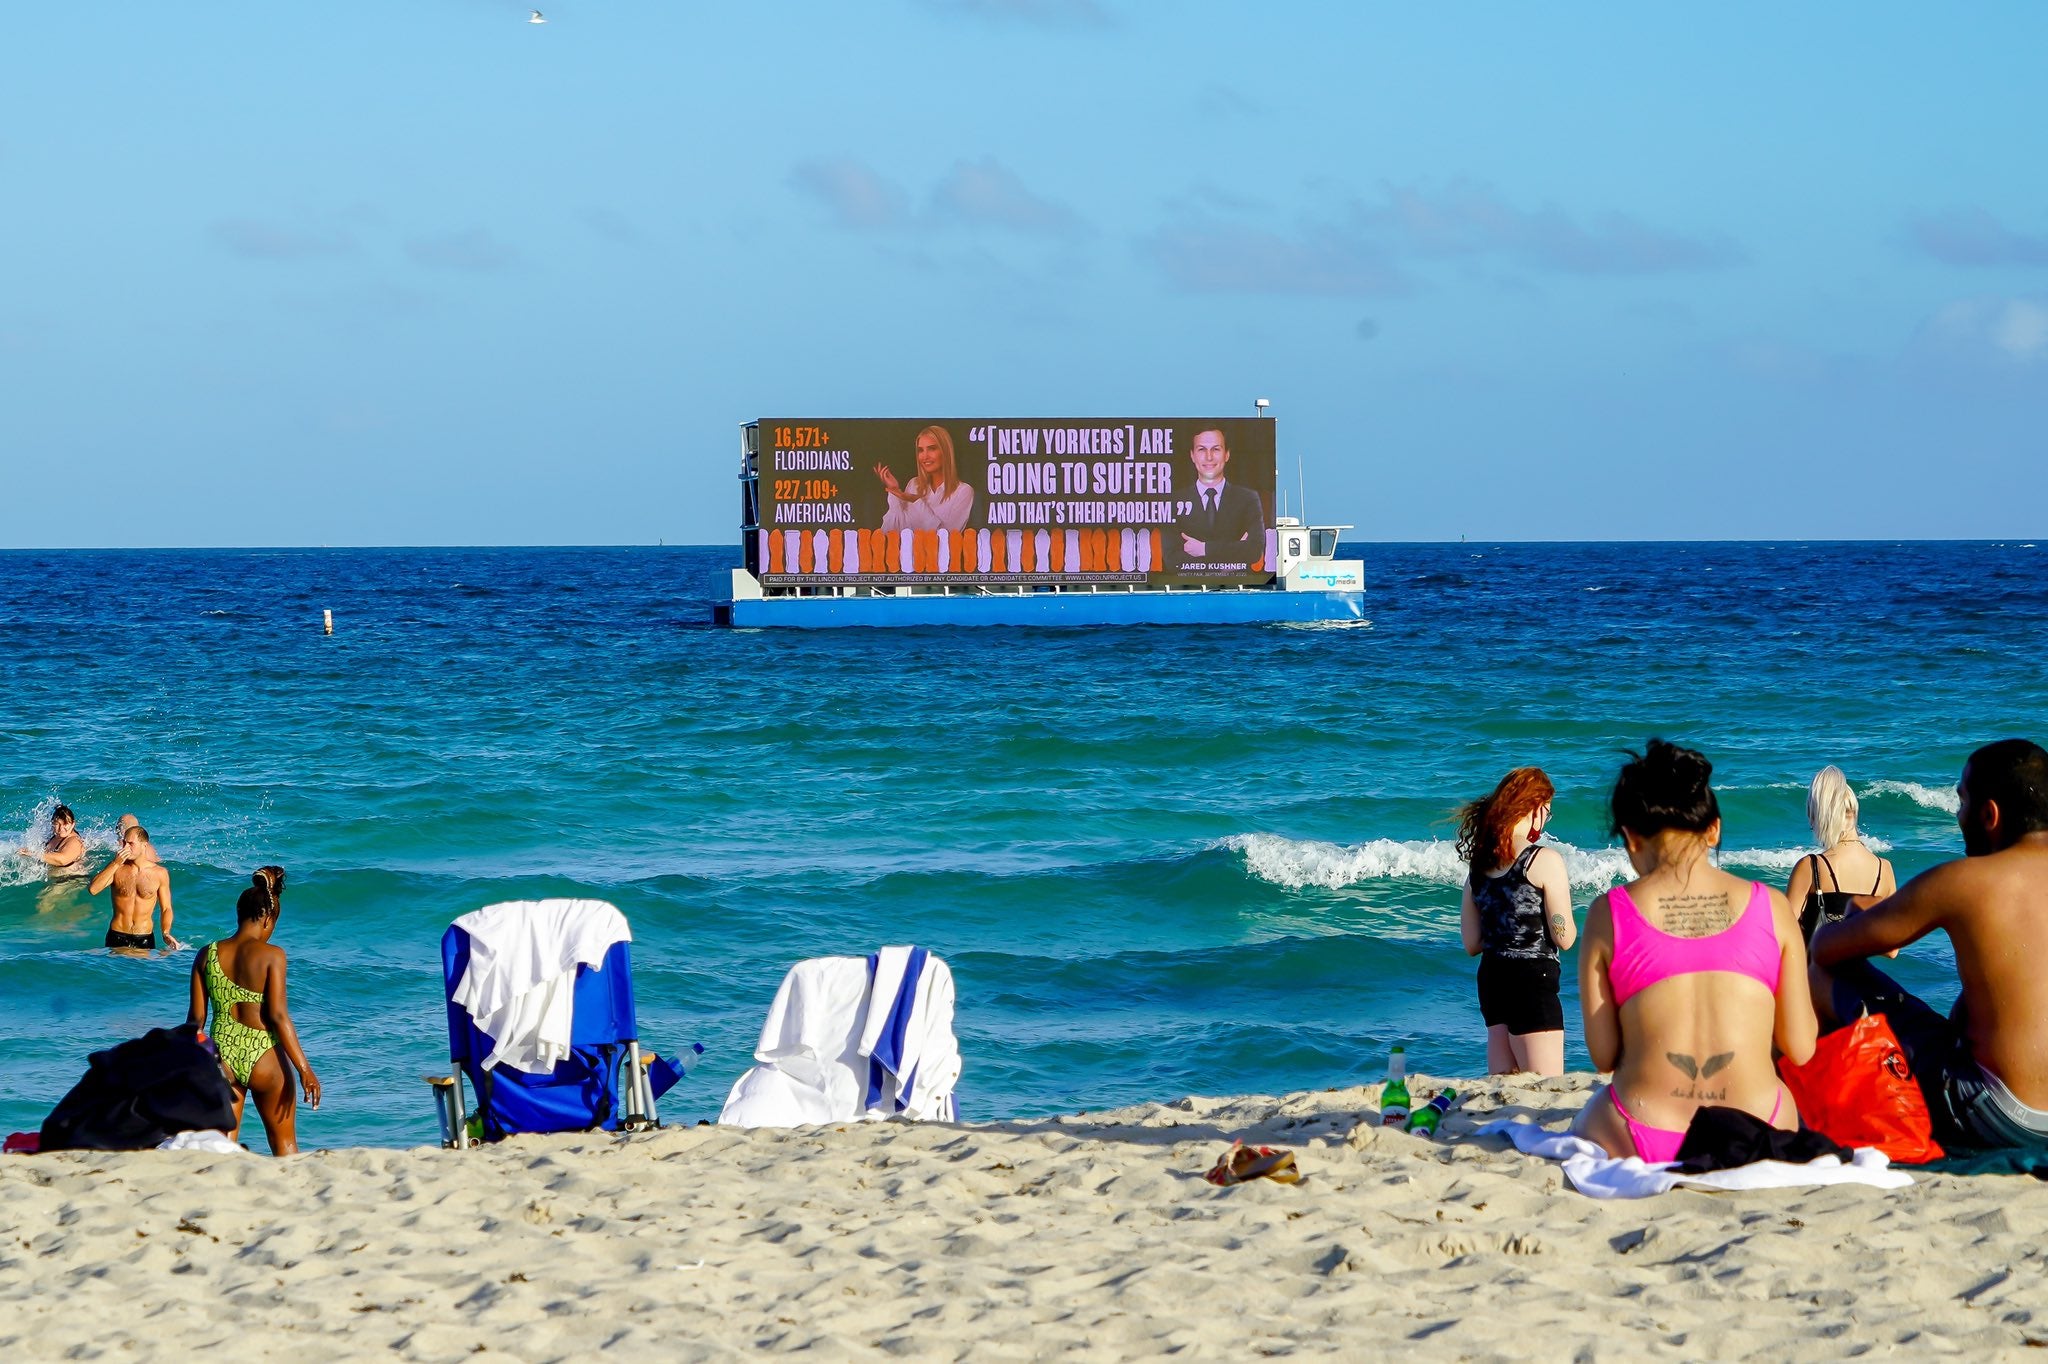 The anti-Trump Republican PAC moved billboards that infuriated Ivanka Trump and Jared Kushner from Times Square in New York to Donald Trump’s Mar-a-Lago resort in Palm Beach, Florida